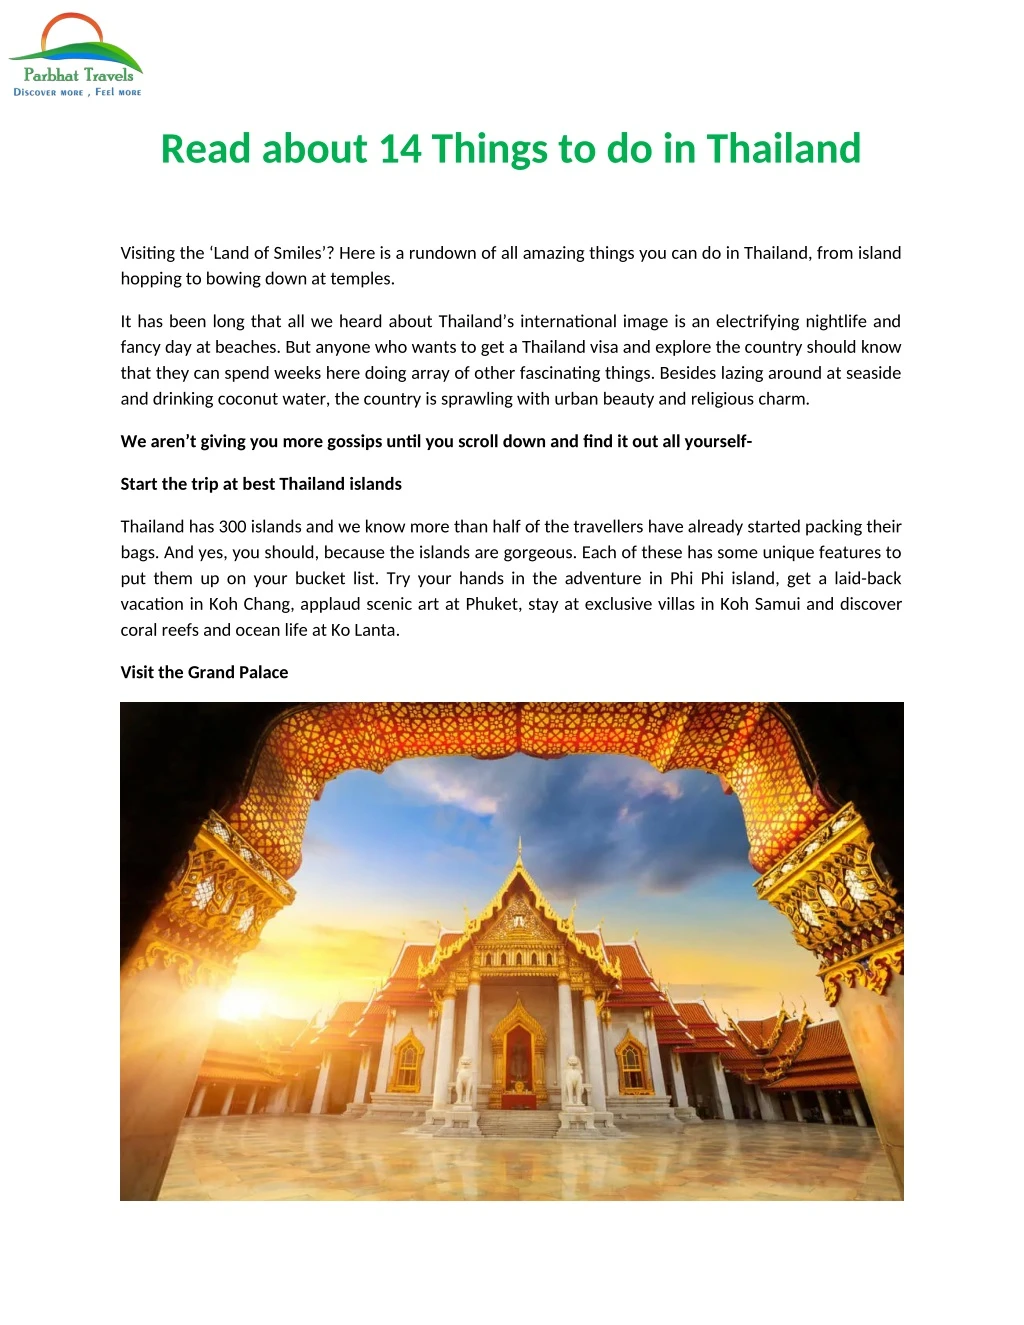 read about 14 things to do in thailand